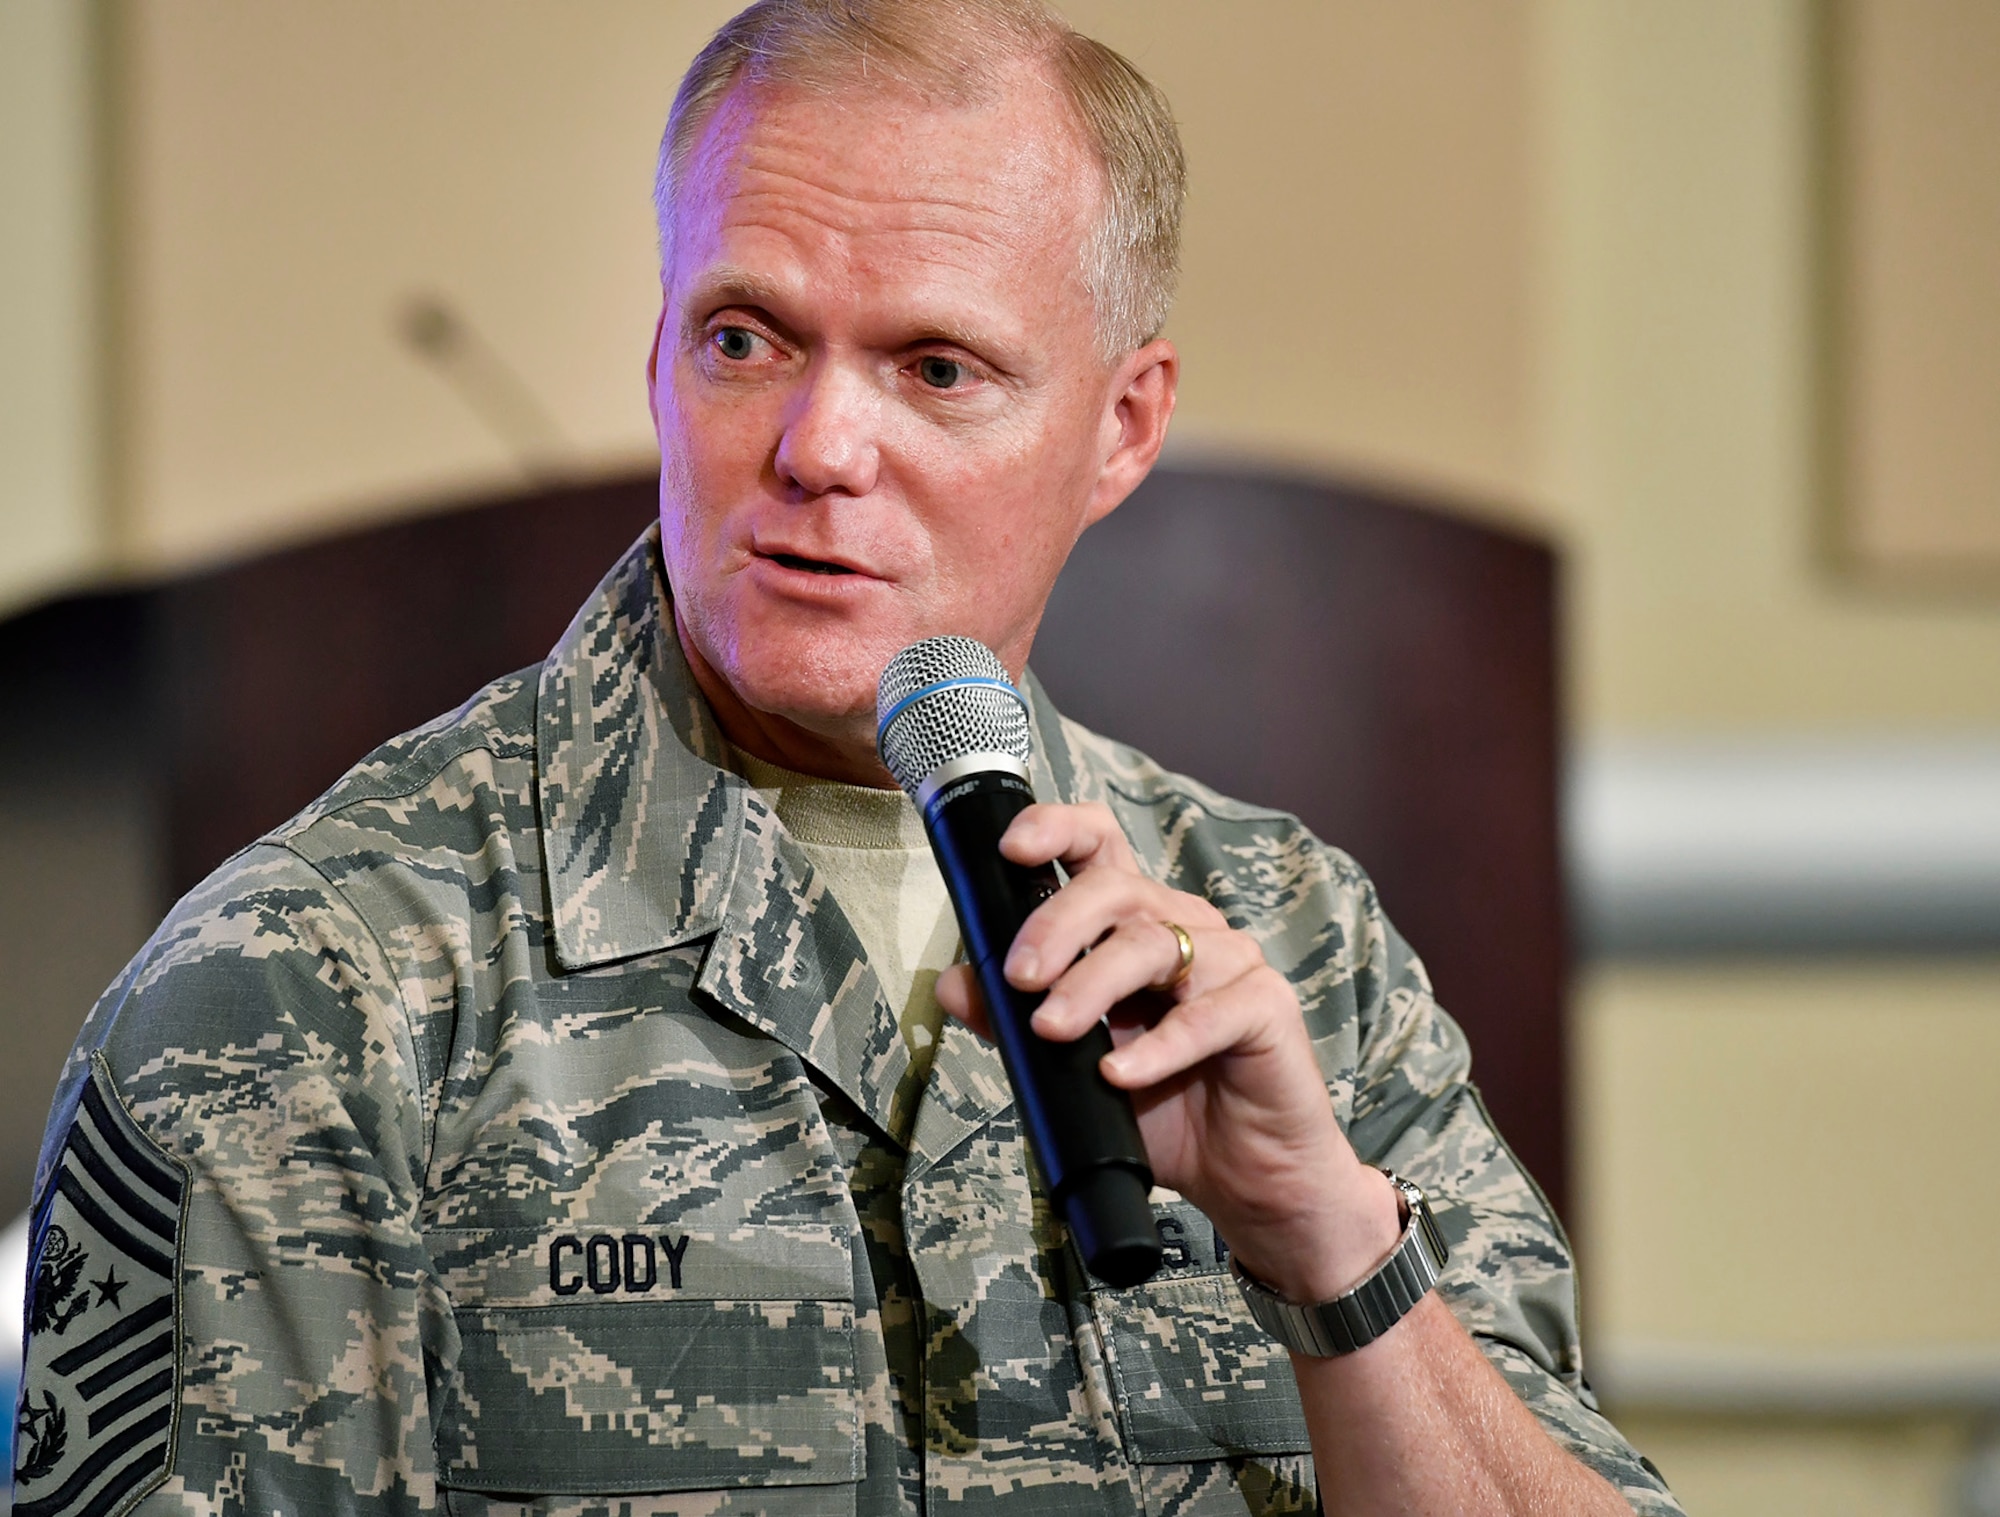 Chief Master Sgt. of the Air Force James A. Cody gives the enlisted leadership perspective during the Secretary of the Air Force Spouse and Family Forum at Joint Base Andrews, Md., Oct. 19, 2016. (U.S. Air Force photo/Scott M. Ash)